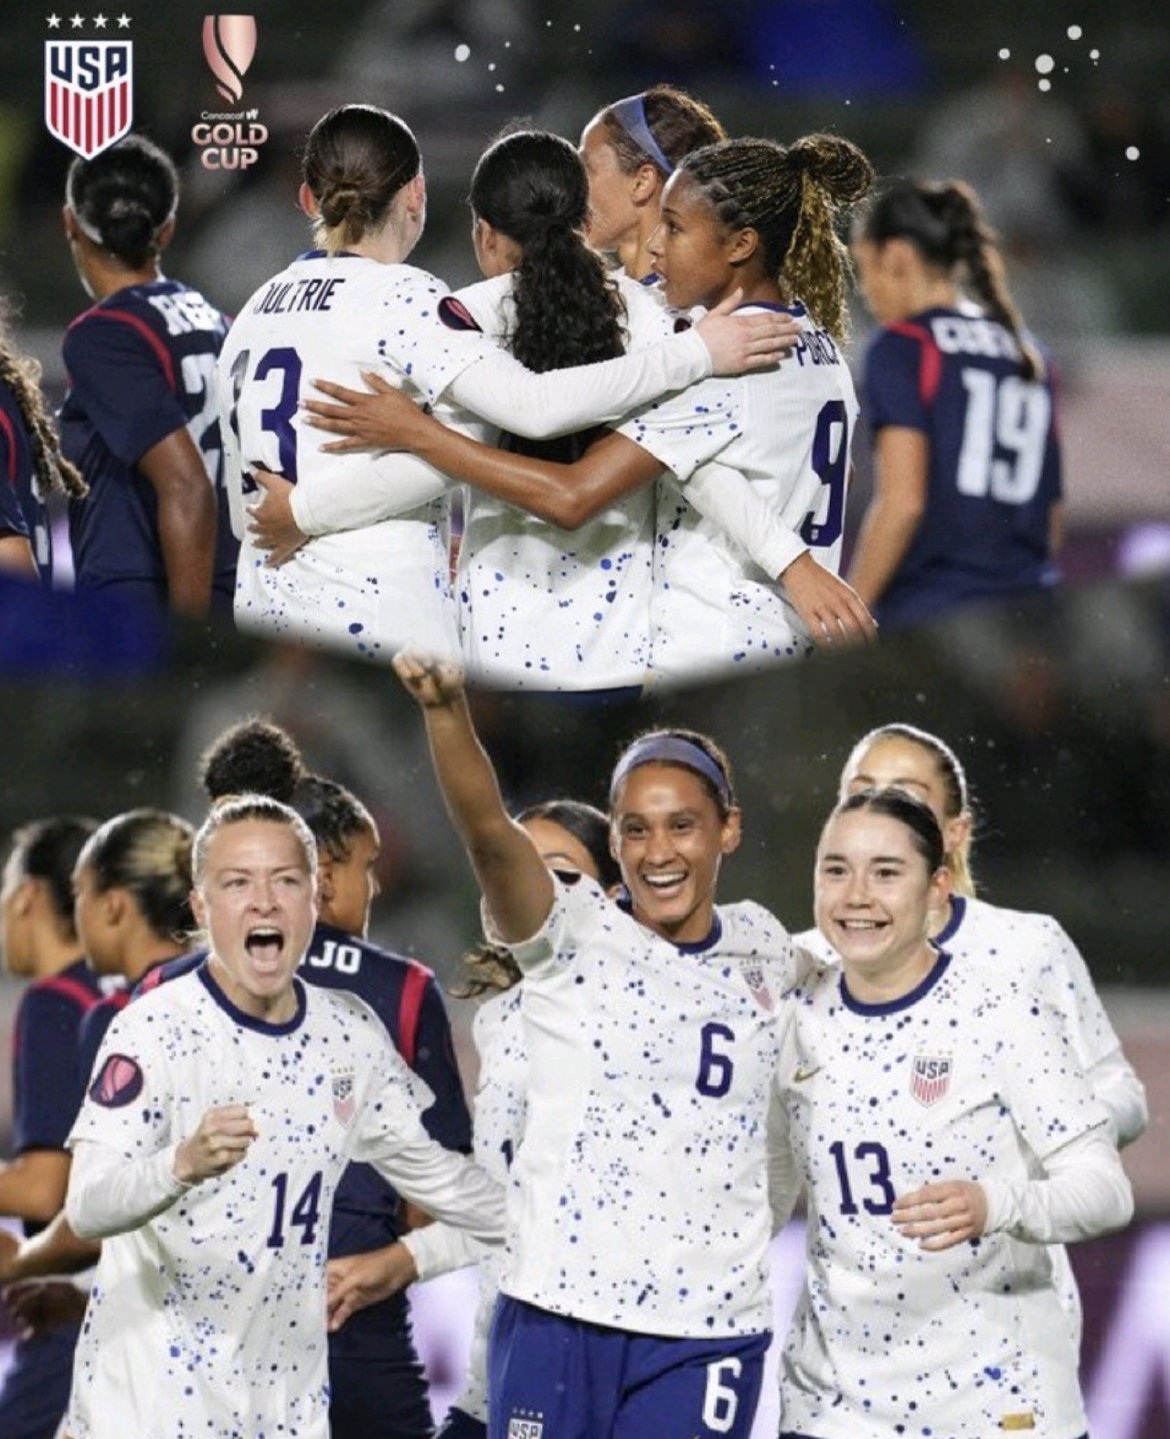 USWNT Defeats Dominican Republic 5-0 in Gold Cup Match